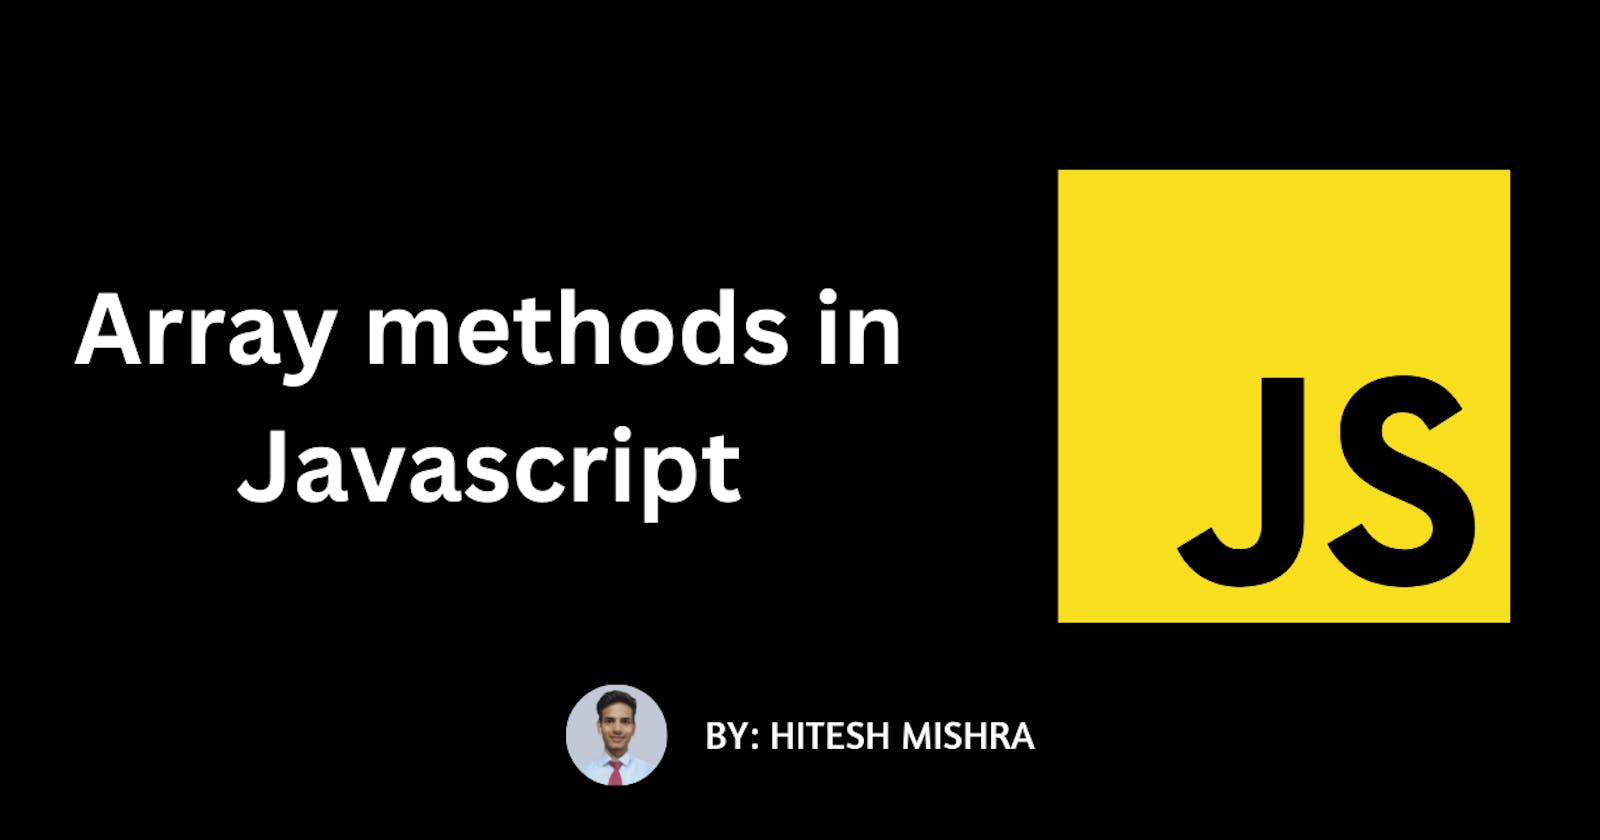 Frequently used Array methods in Javascript